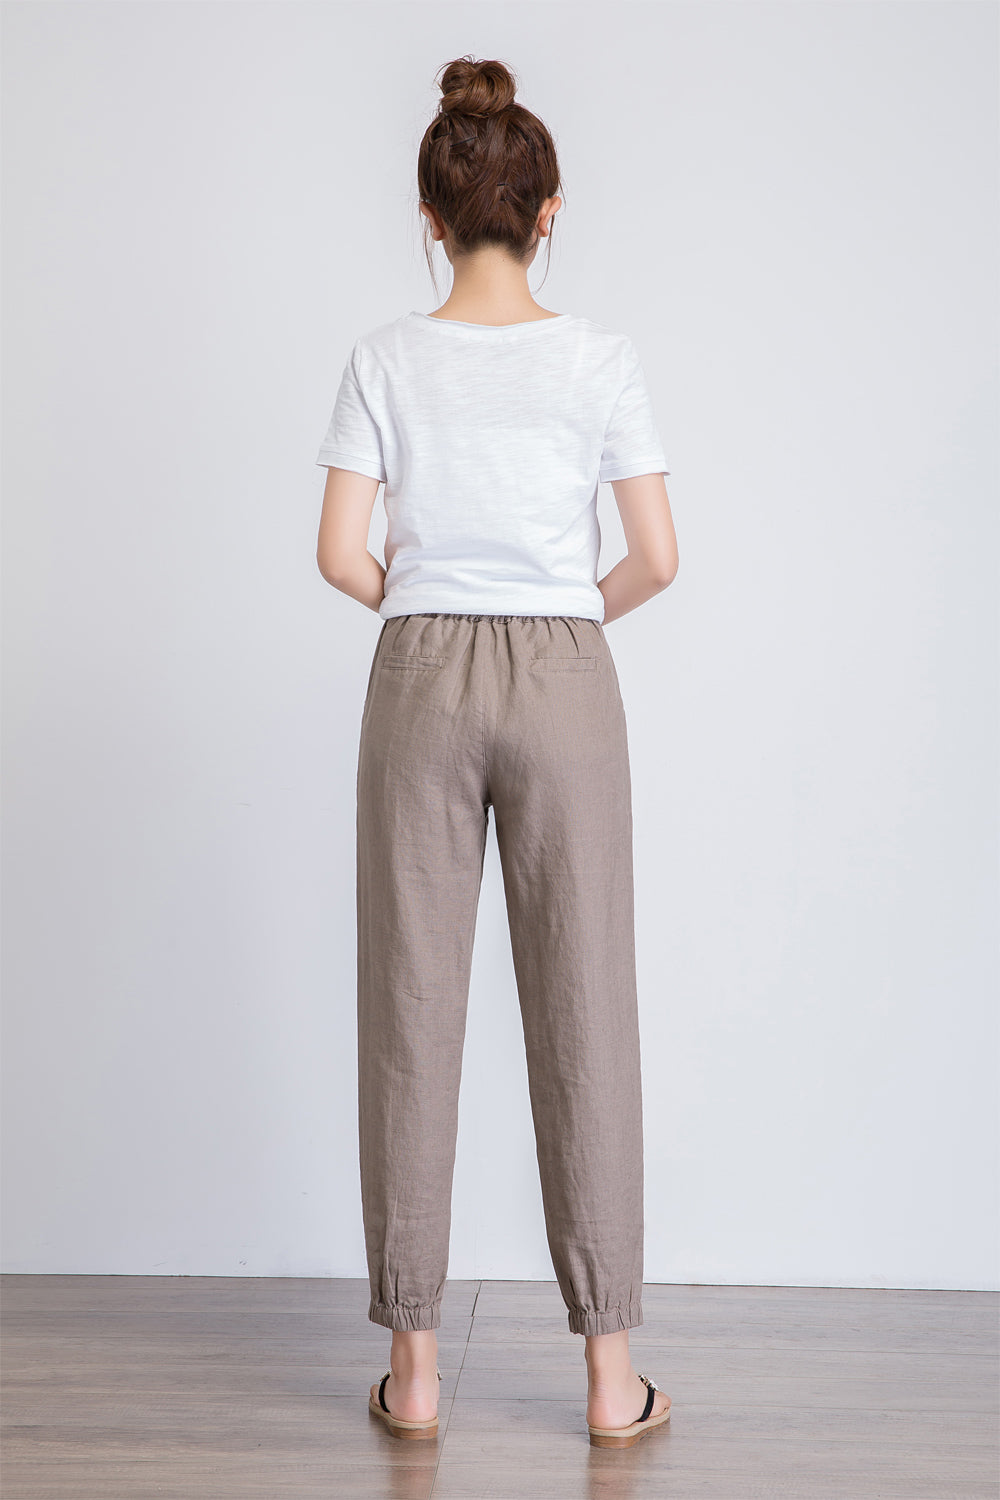 Lastesso Womens Straight Leg Cropped Pants Solid Cotton Linen Pants Elastic  Waist Loose Fit Trousers Baggy Cozy Summer Leisure Resort Wear with Pockets  - Walmart.com